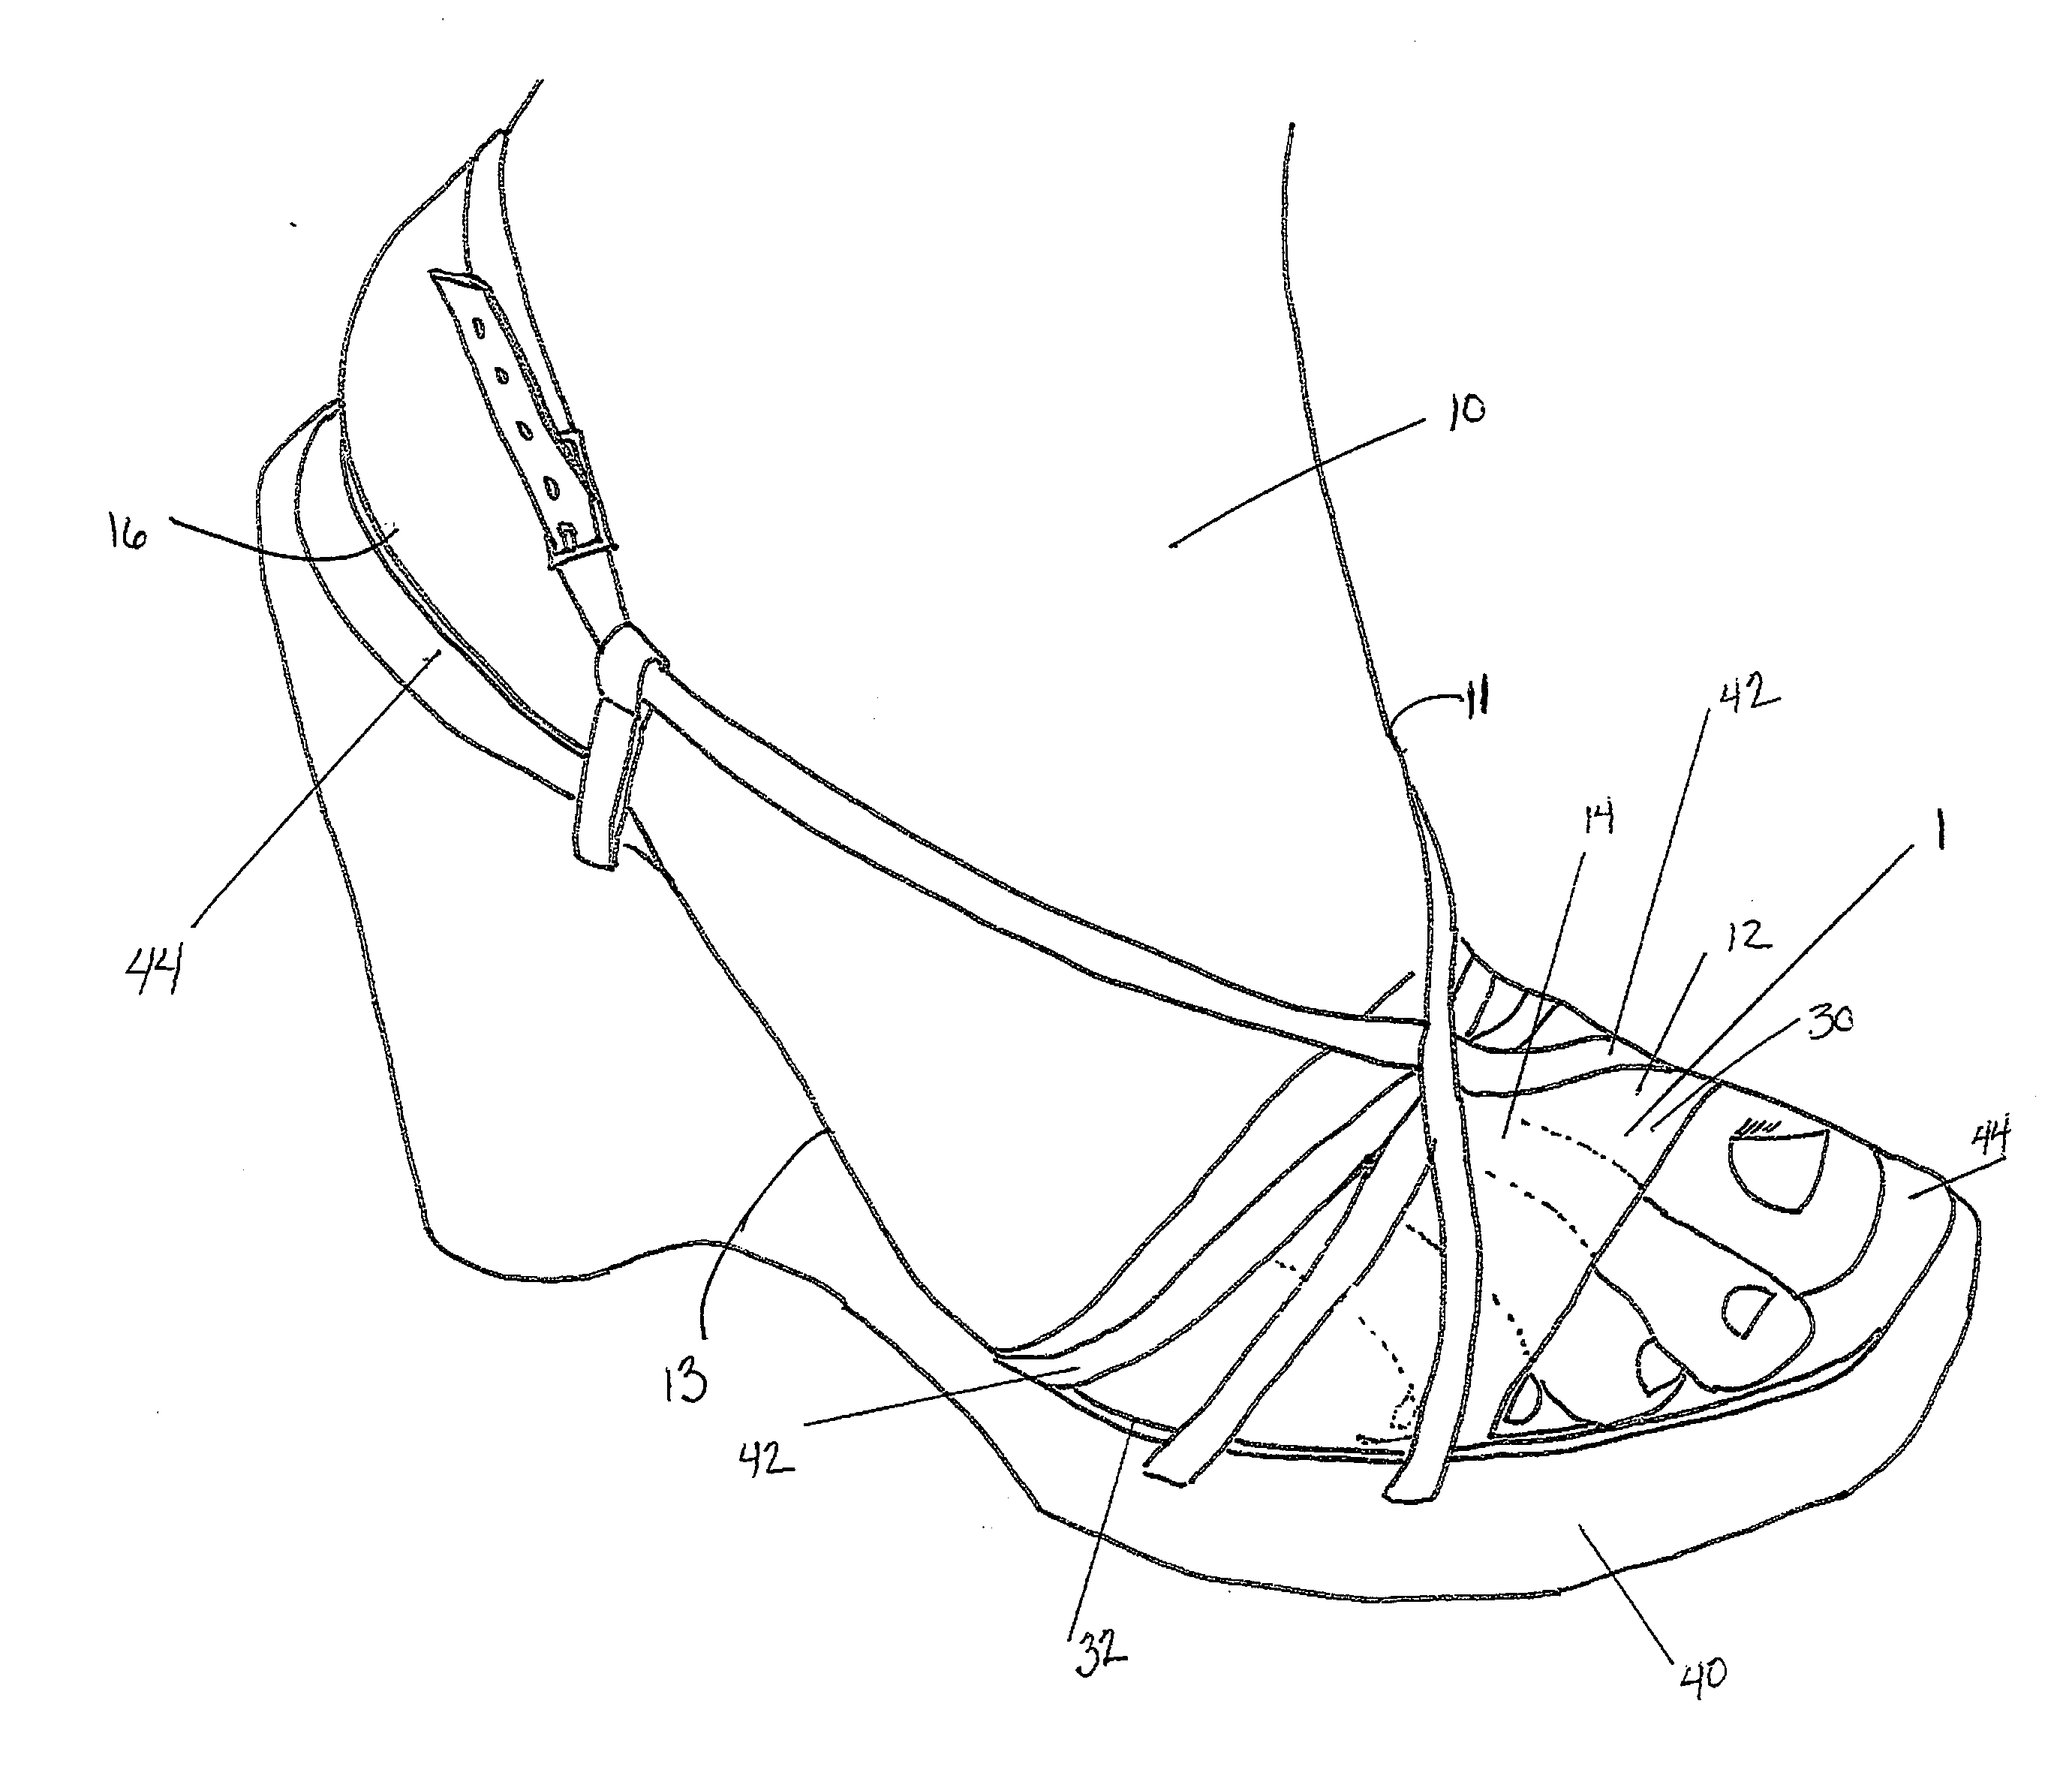 Foot Protection Device for Insertion into a Sandal to Minimize Pressure and Irritations on the Top and Front Portions of the Foot